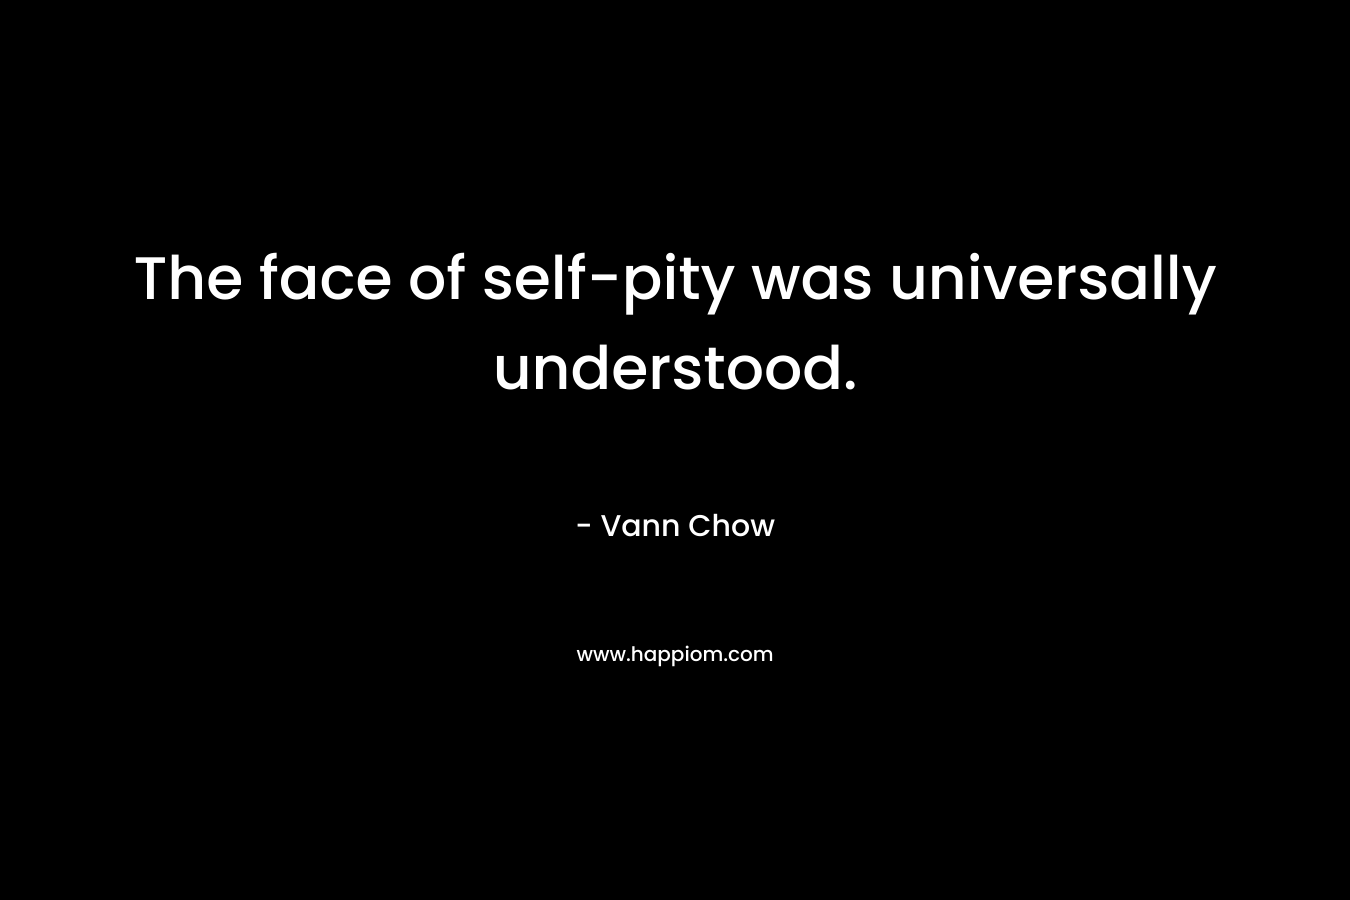 The face of self-pity was universally understood. – Vann Chow